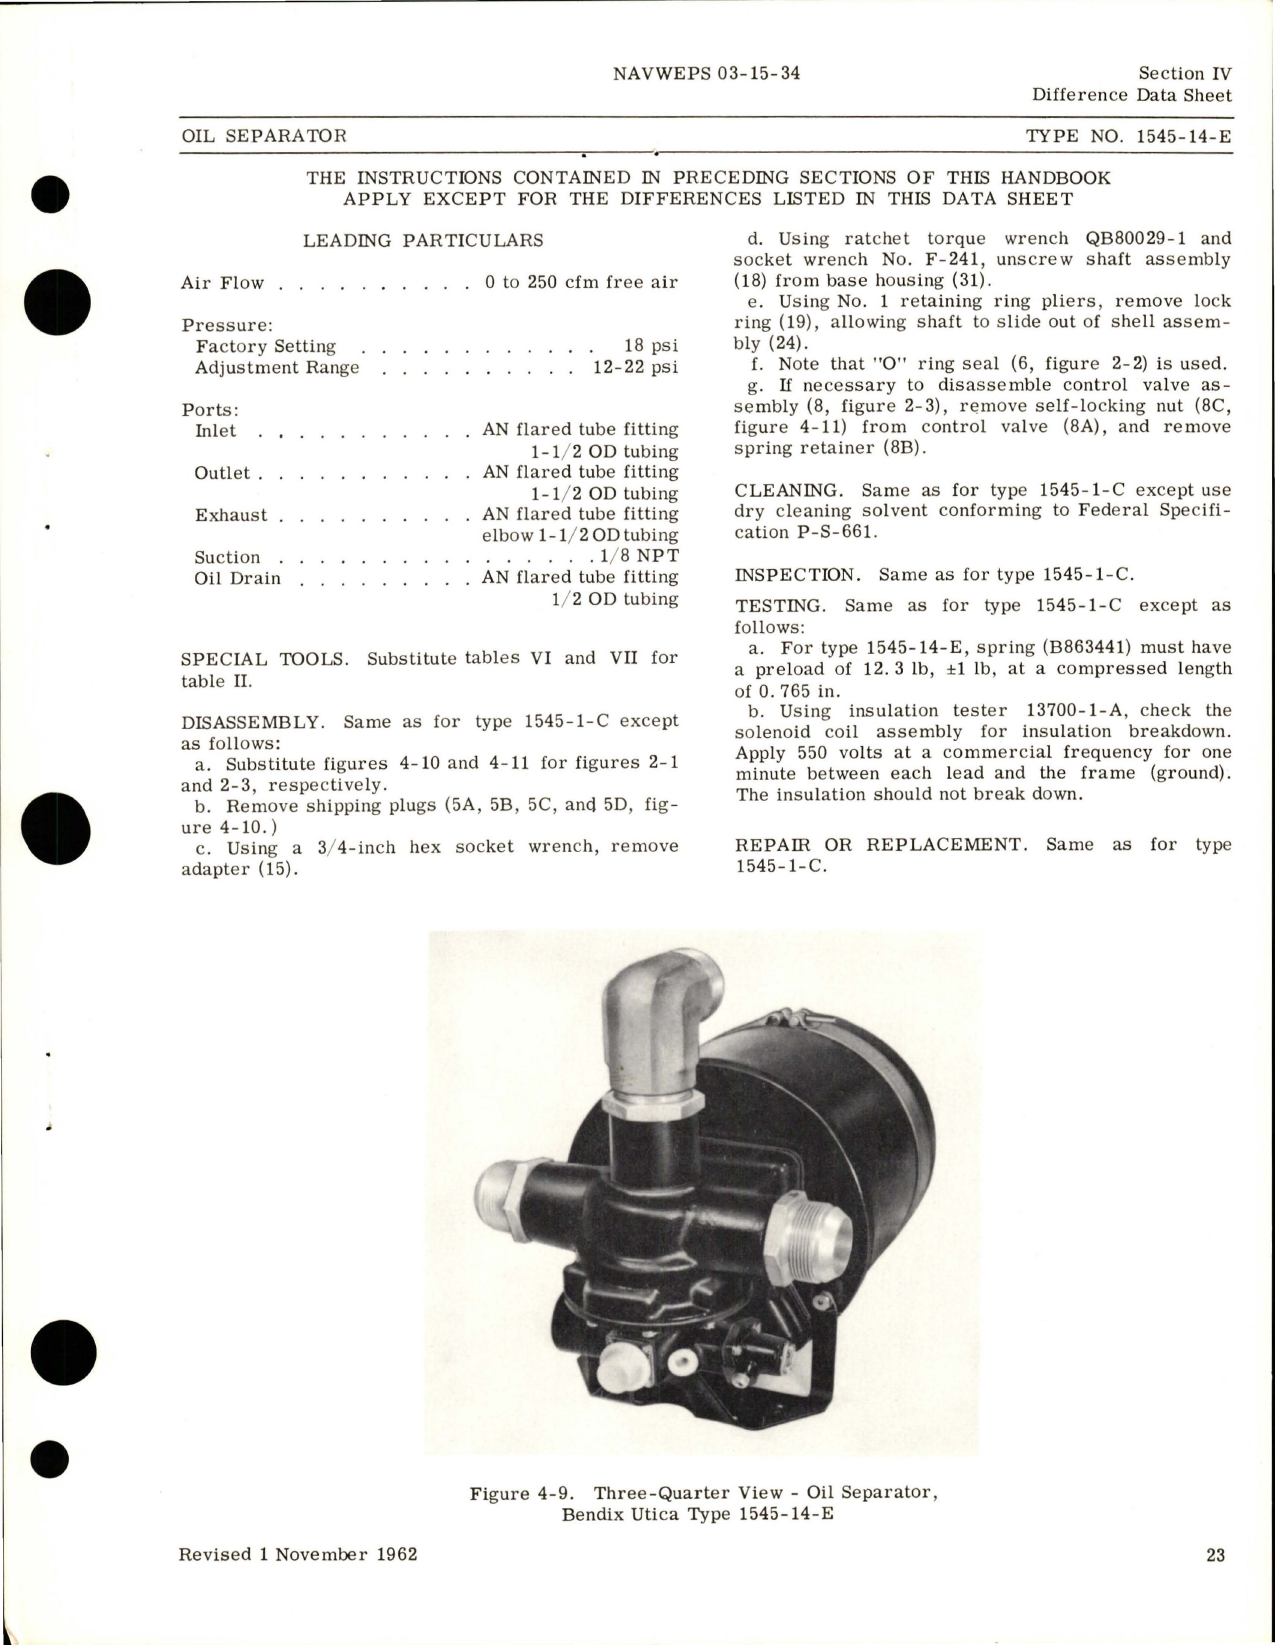 Sample page 5 from AirCorps Library document: Overhaul Instructions for Oil Separator - Parts 1545-1-C, 1545-1-D, 1545-4-E, 1545-5-D, 1545-6-D, 1545-6-E, 1545-14-E, and 659-1-A